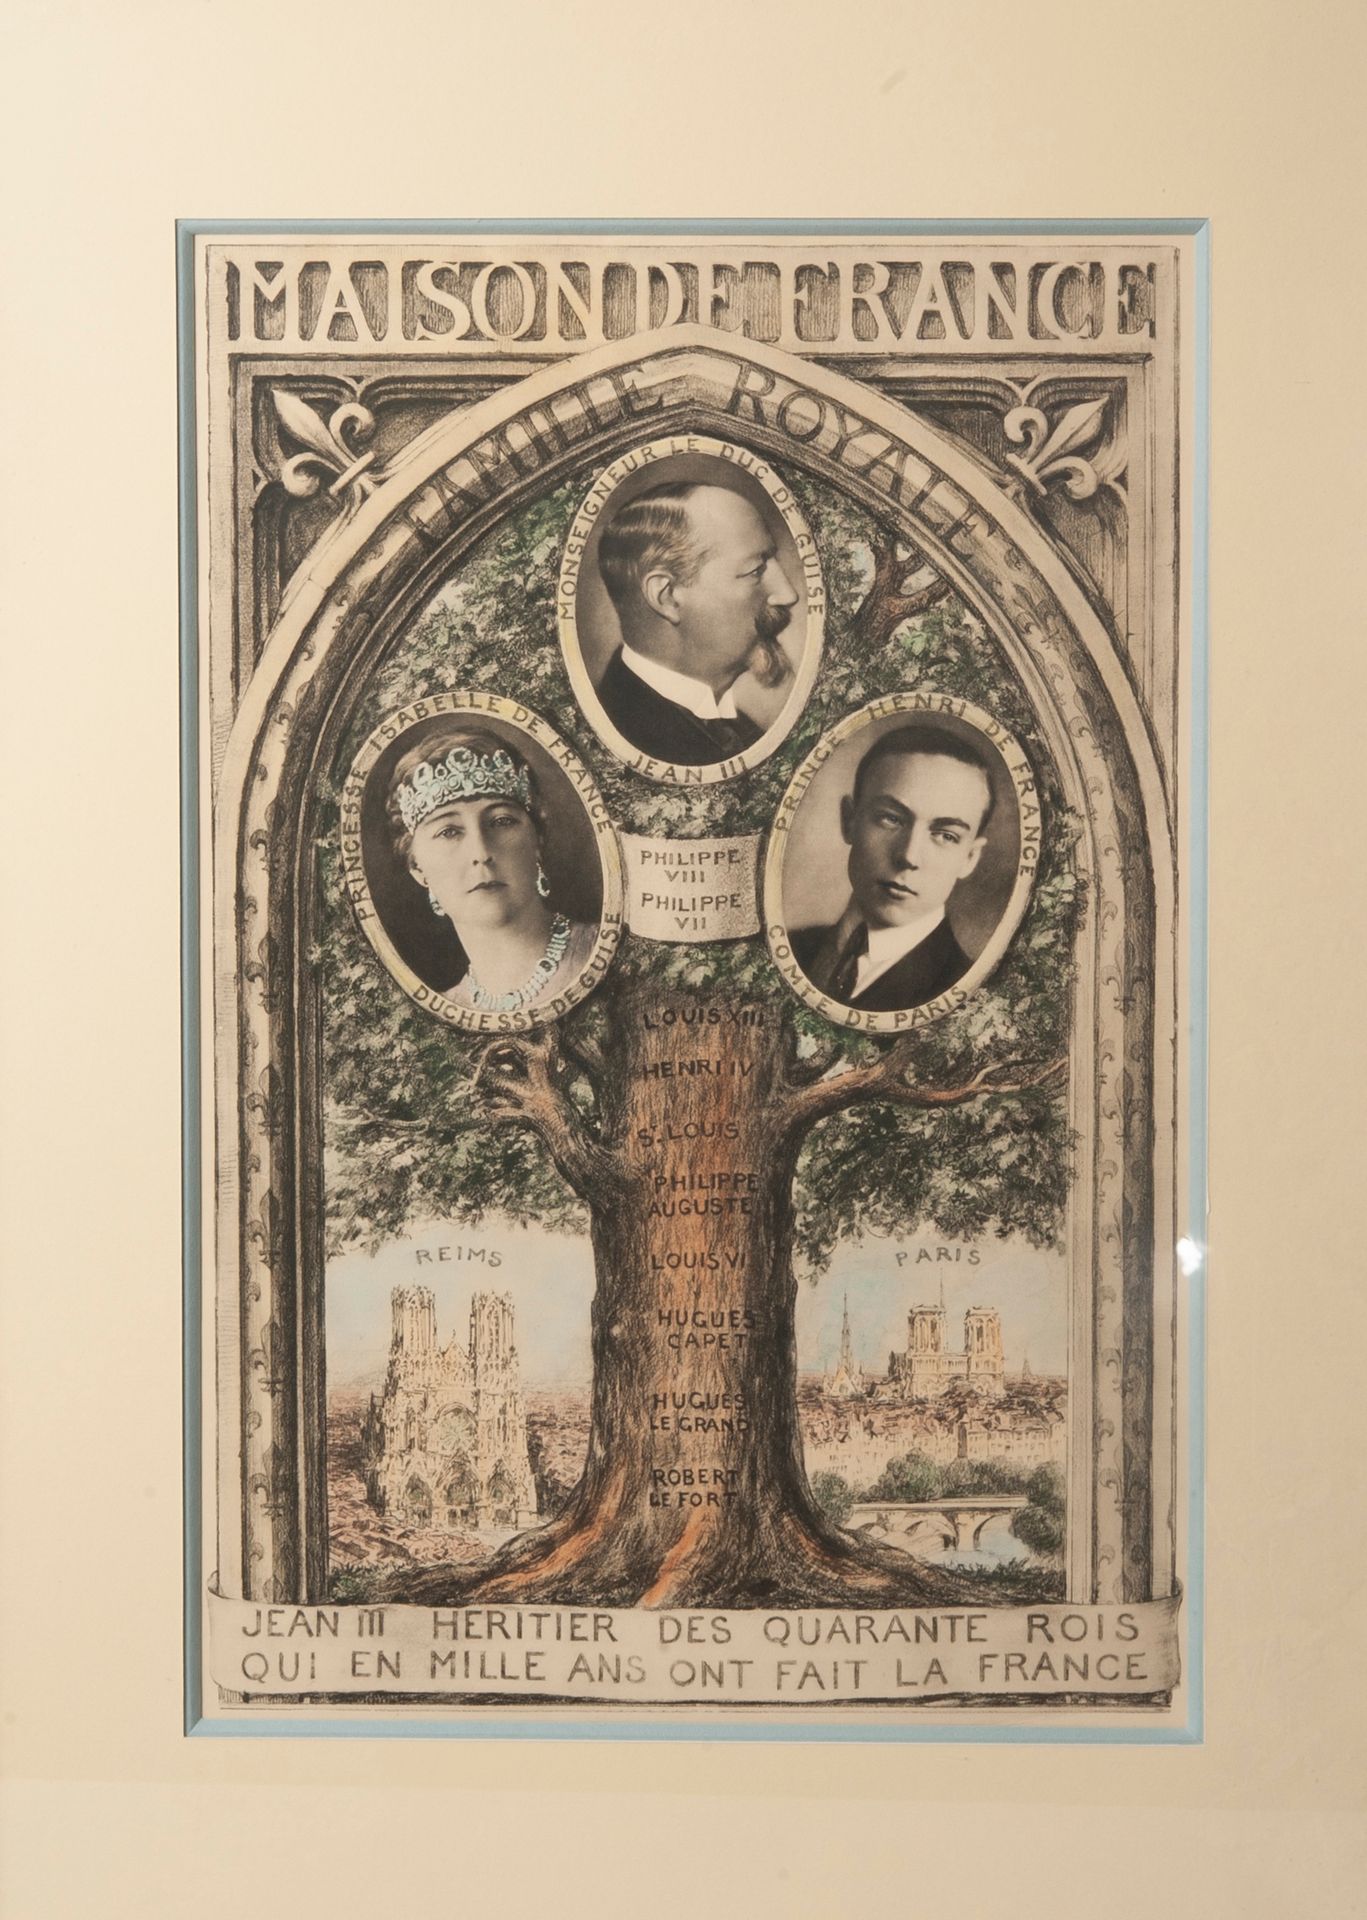 Null Orléans.

Lithograph representing a family tree of the kings of France surm&hellip;